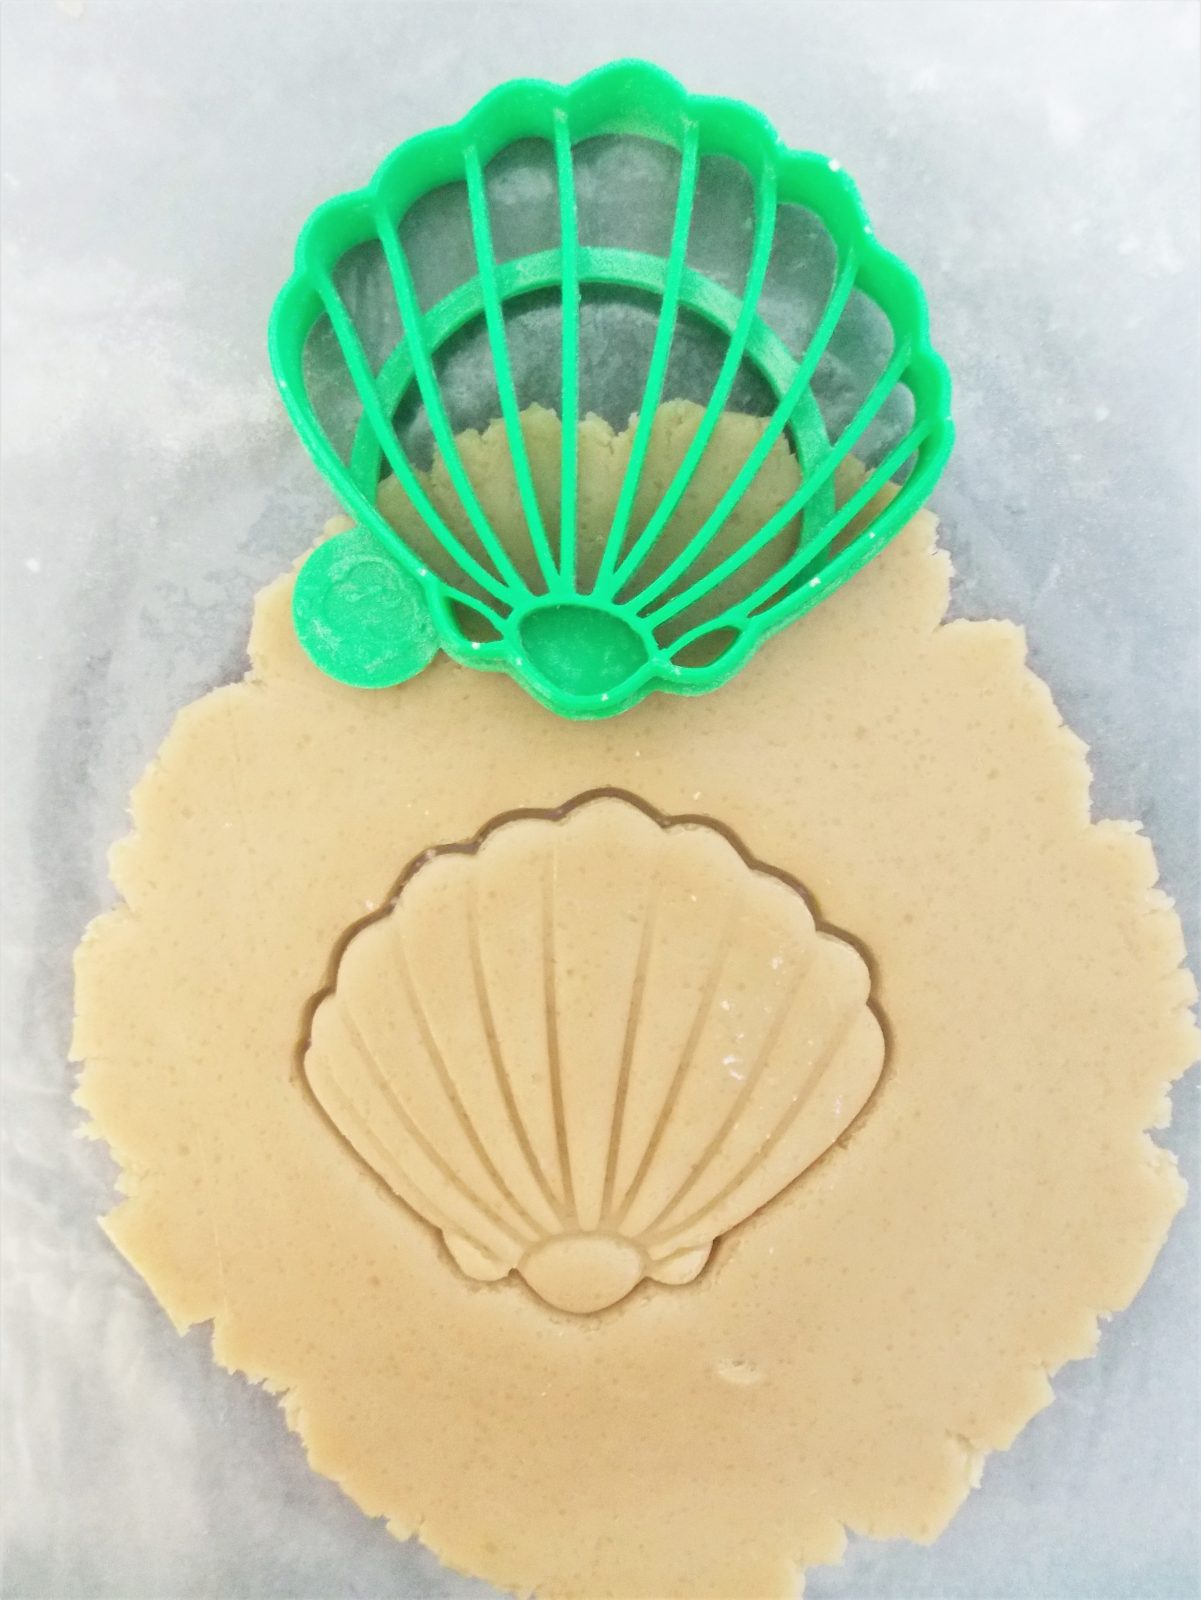 Clam Shell Cookie Cutter